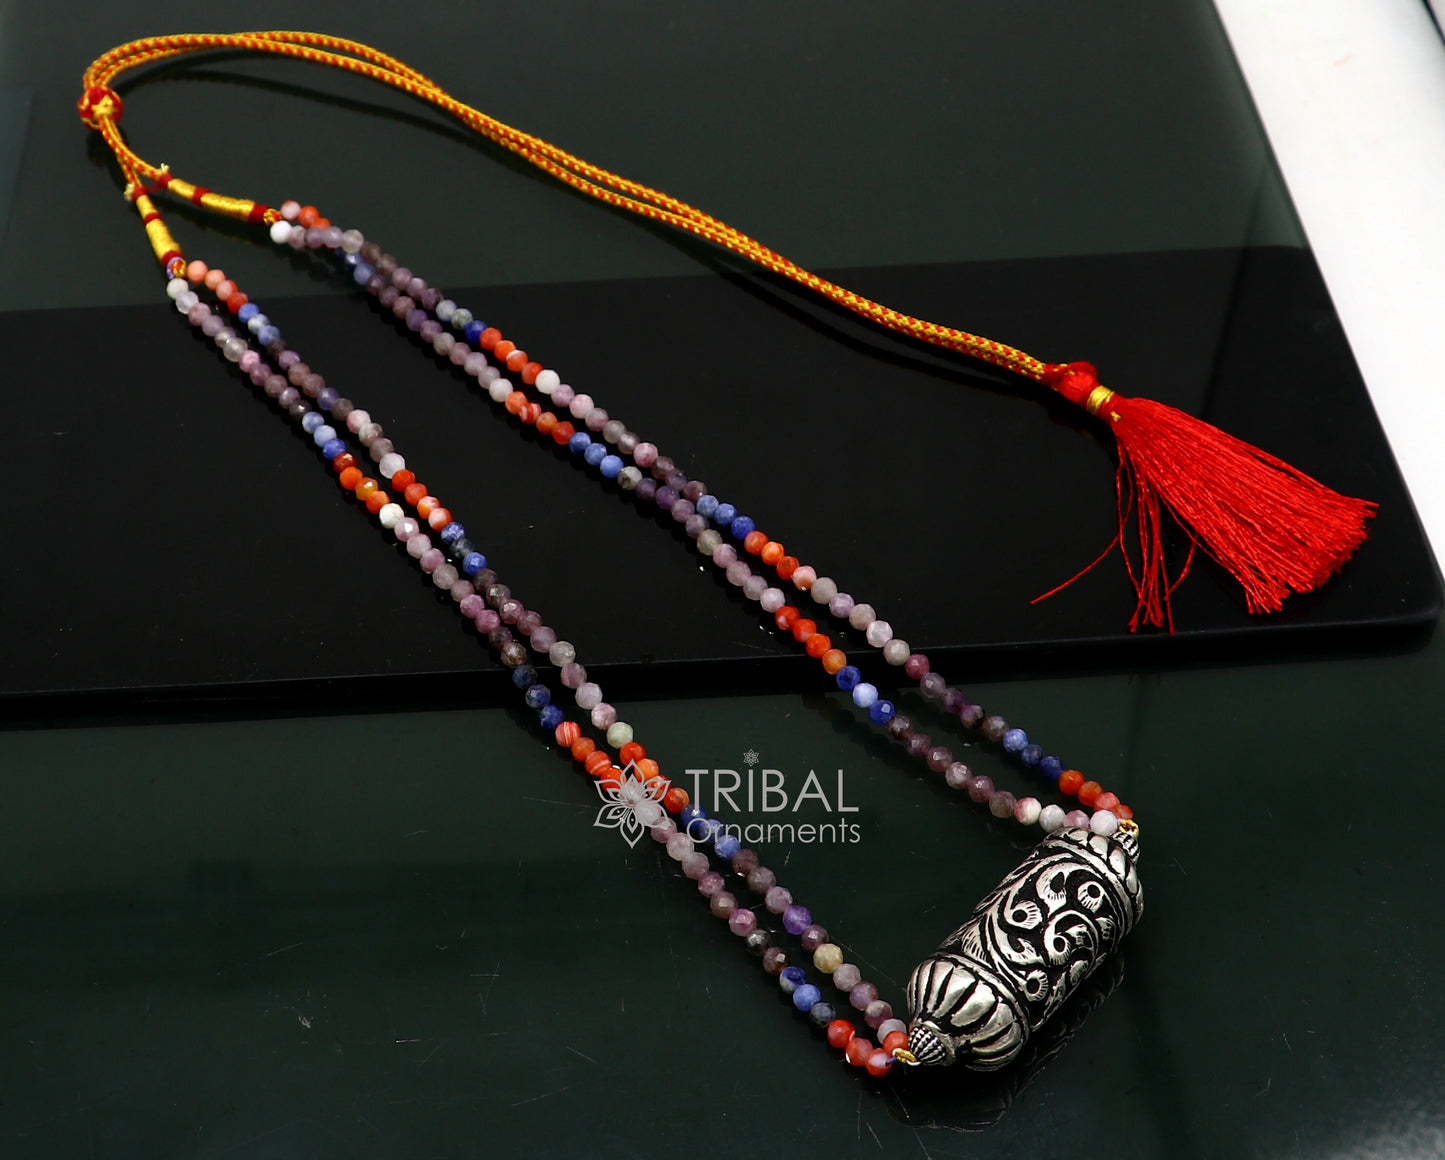 Indian traditional cultural style trendy natural stone beaded 925 sterling silver chitai nakshi work necklace, choker tribal jewelry set607 - TRIBAL ORNAMENTS